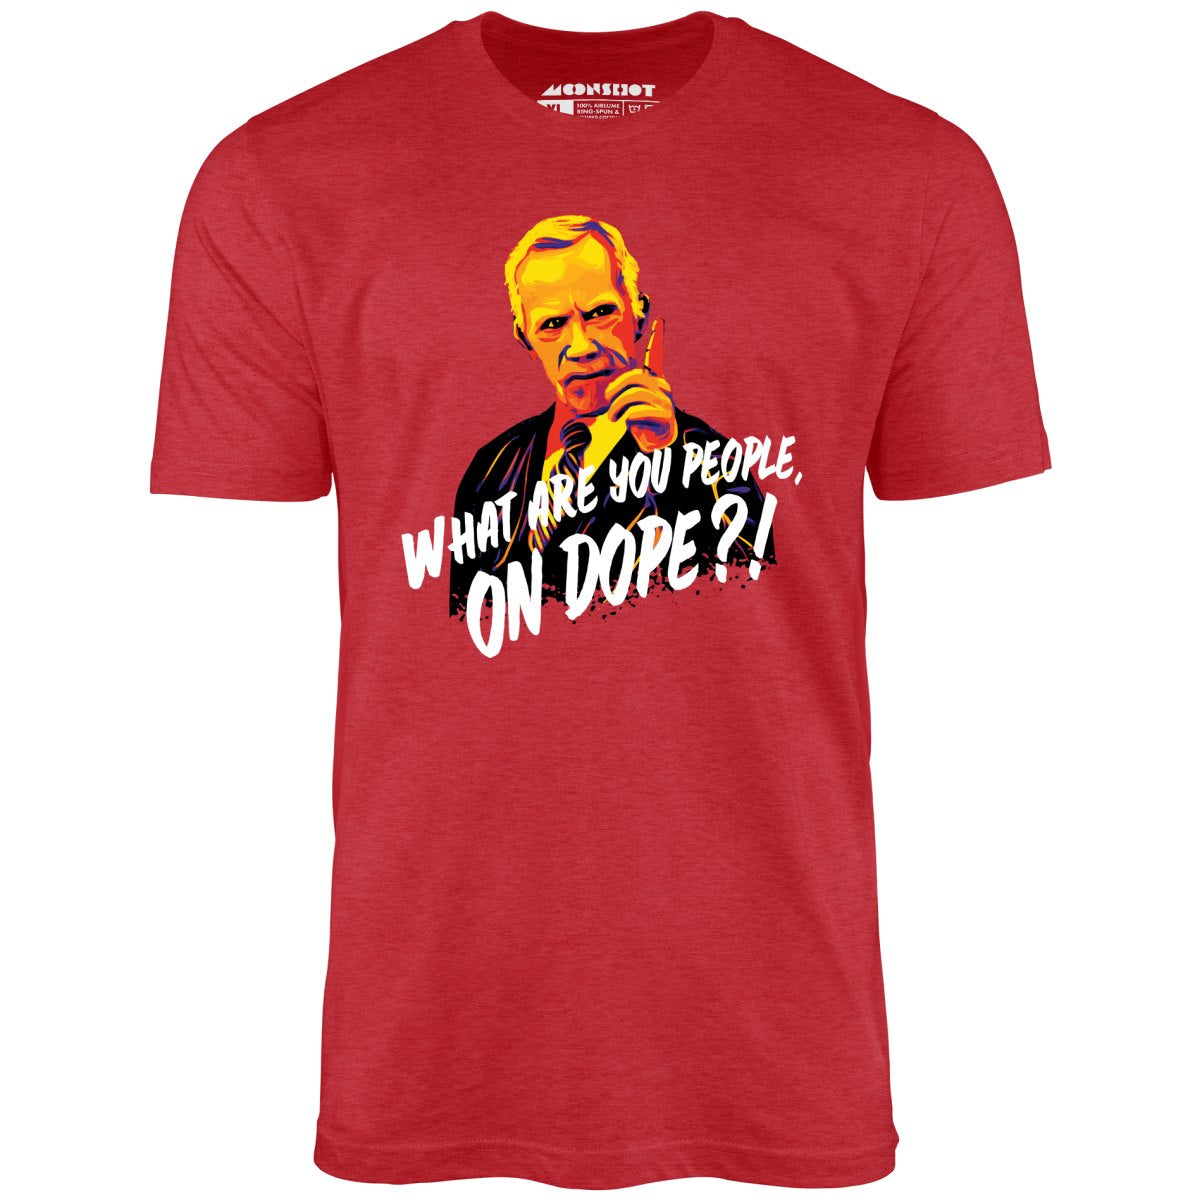 Mr. Hand - What Are You People, On Dope? - Unisex T-Shirt